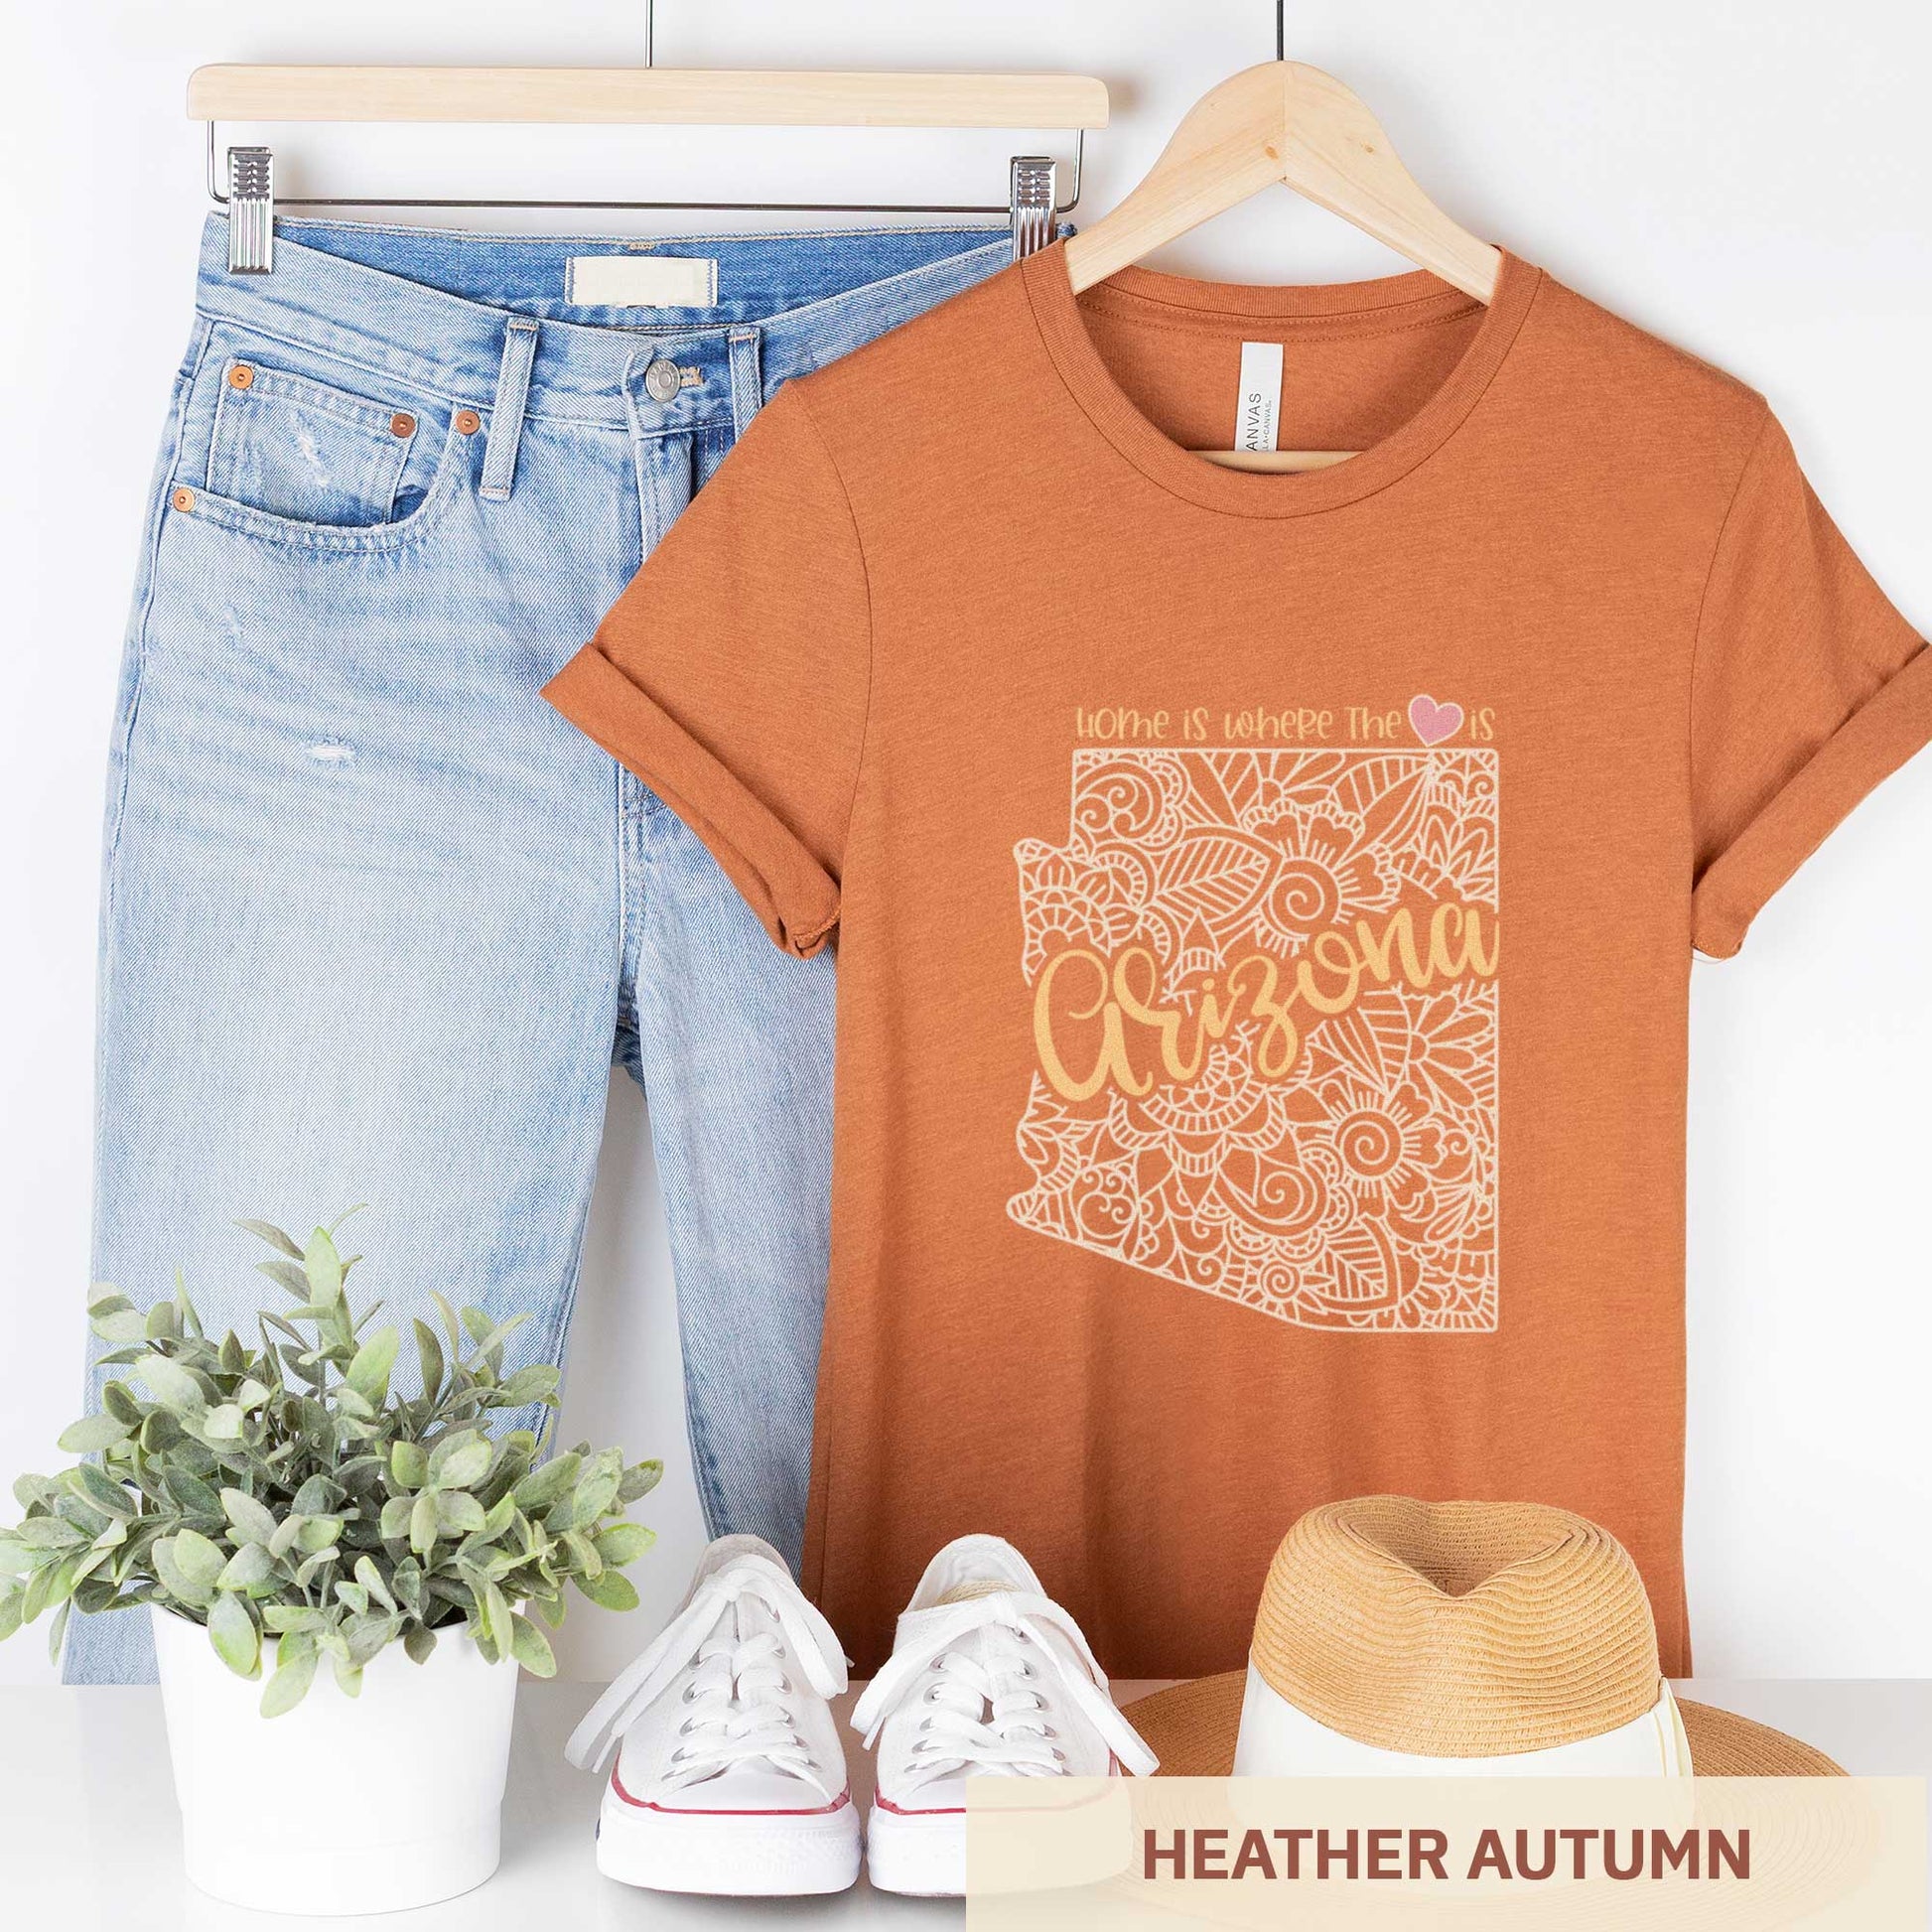 A hanging heather autumn Bella Canvas t-shirt featuring a mandala in the shape of Arizona with the words home is where the heart is.